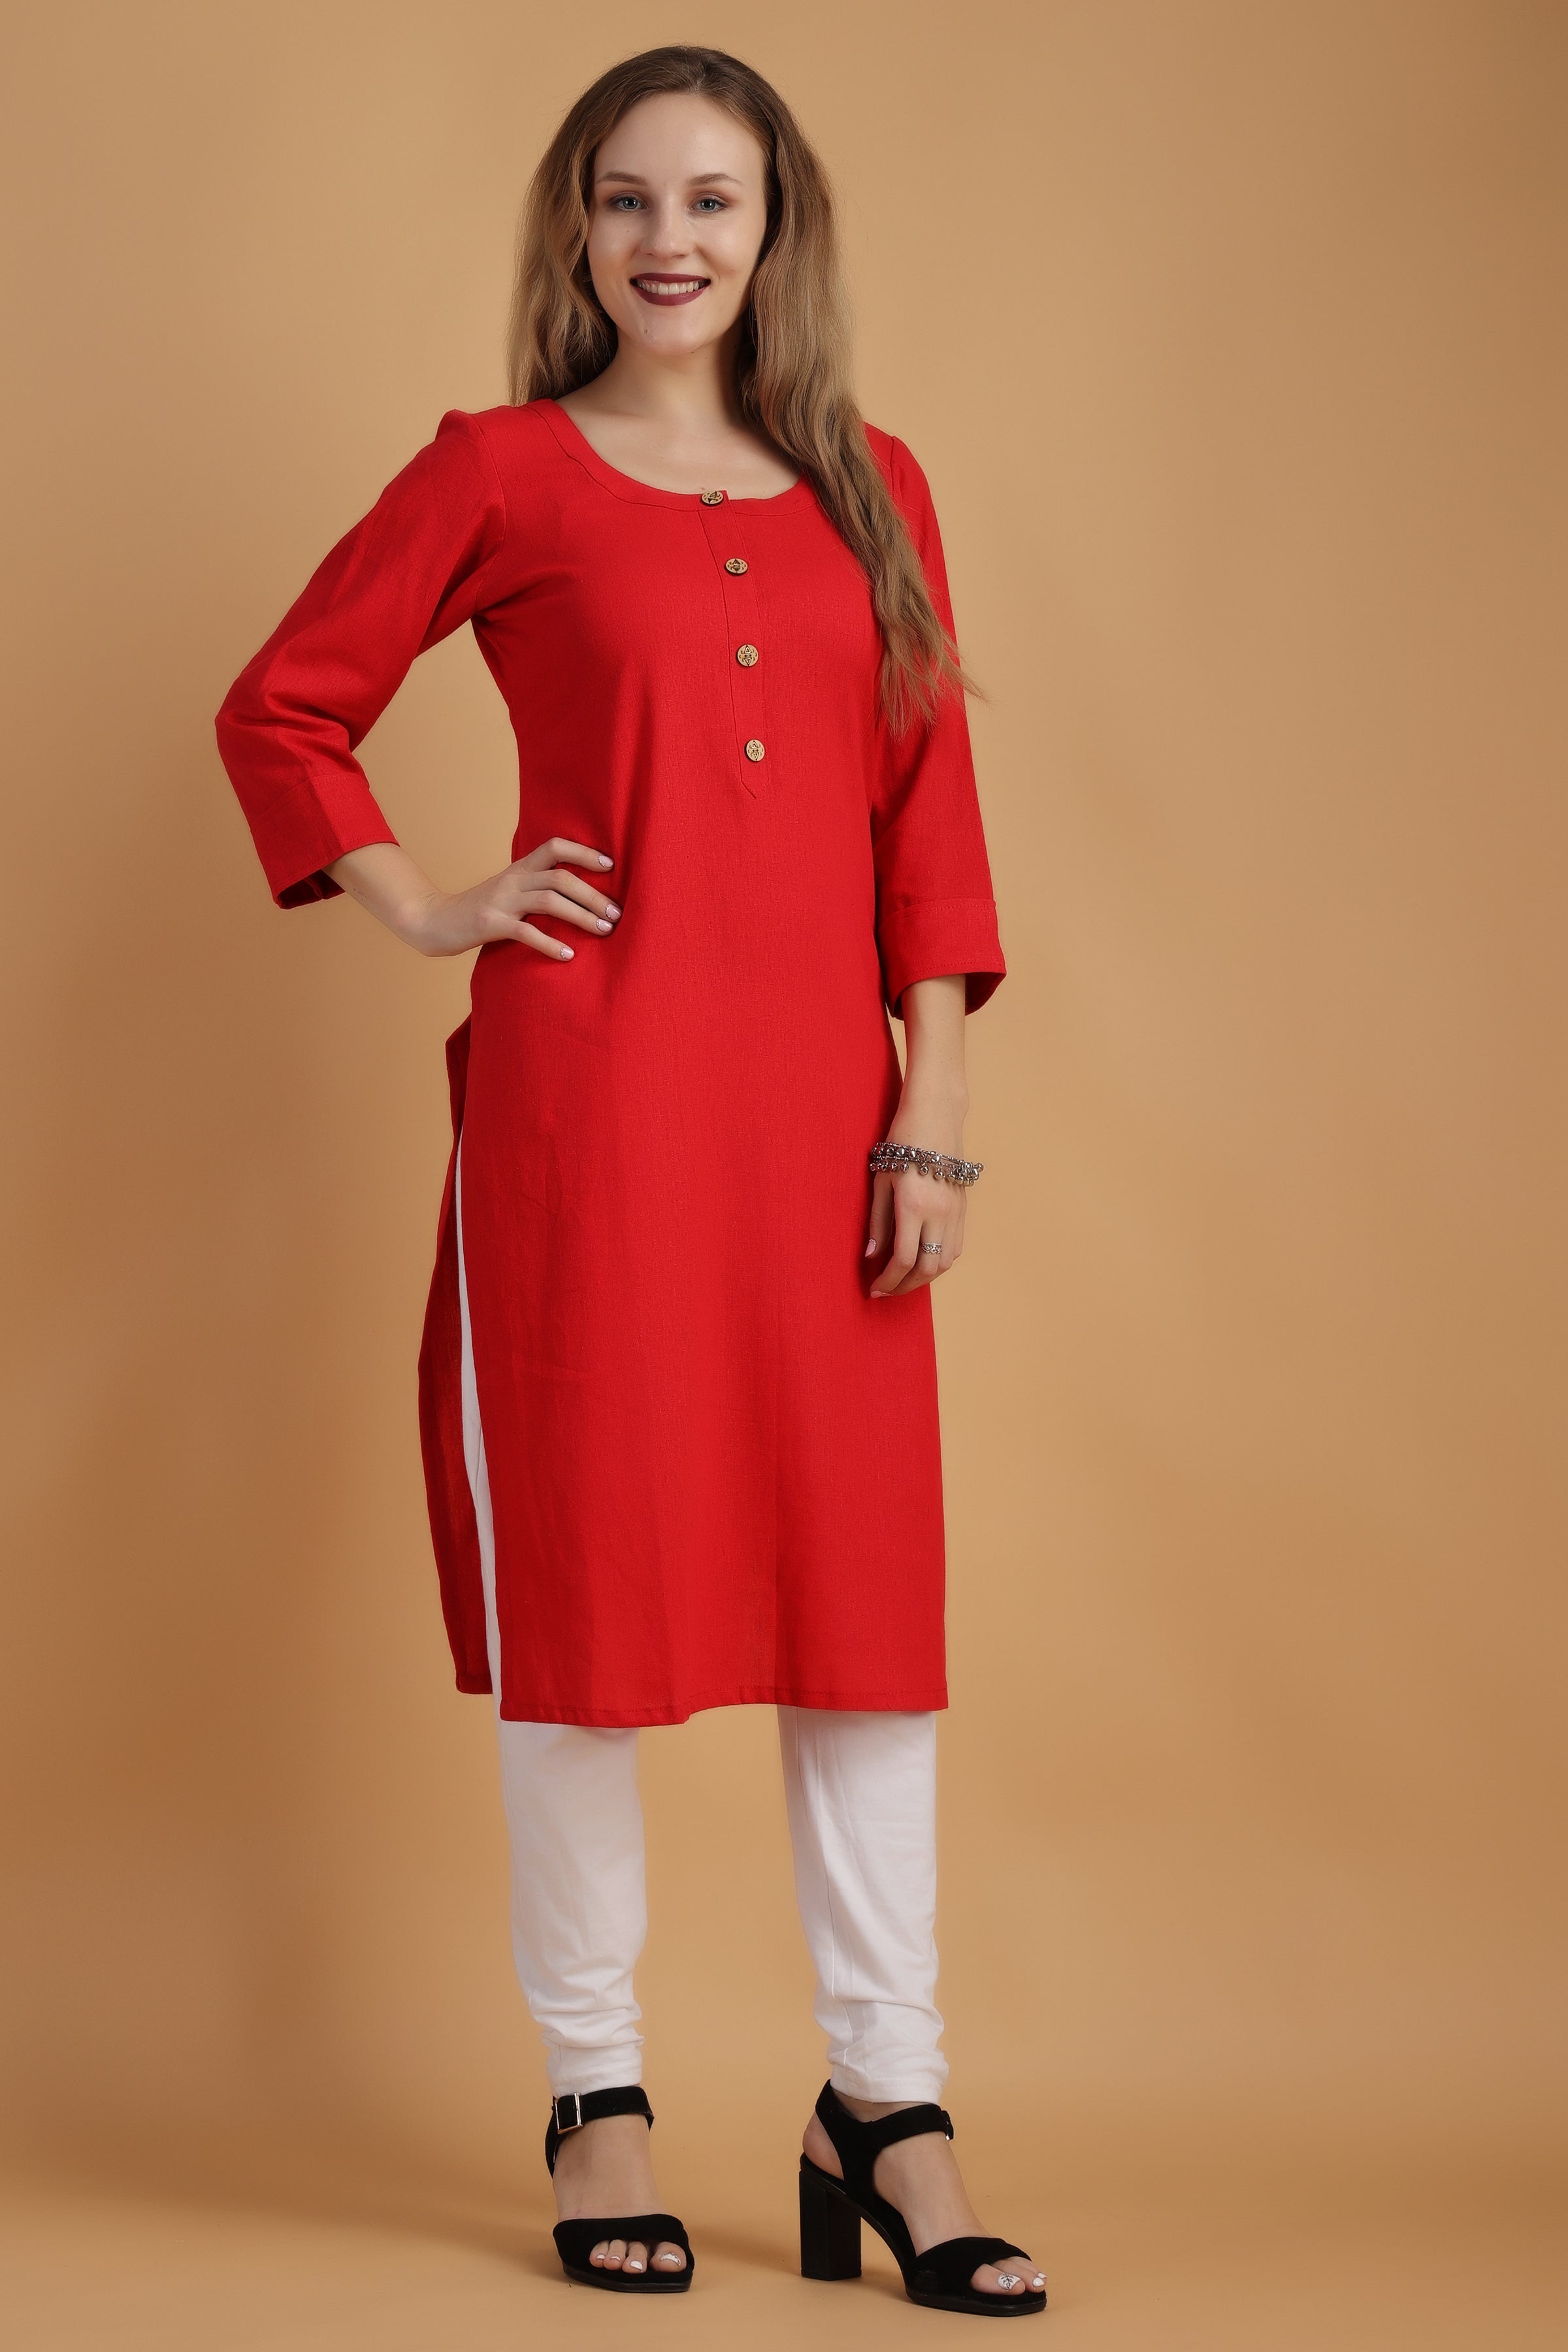 Fabclub Rayon Floral Printed Straight Red Women Kurti, Size: M, L, XL, 2XL,  Wash Care: Machine wash at Rs 369 in Ahmedabad